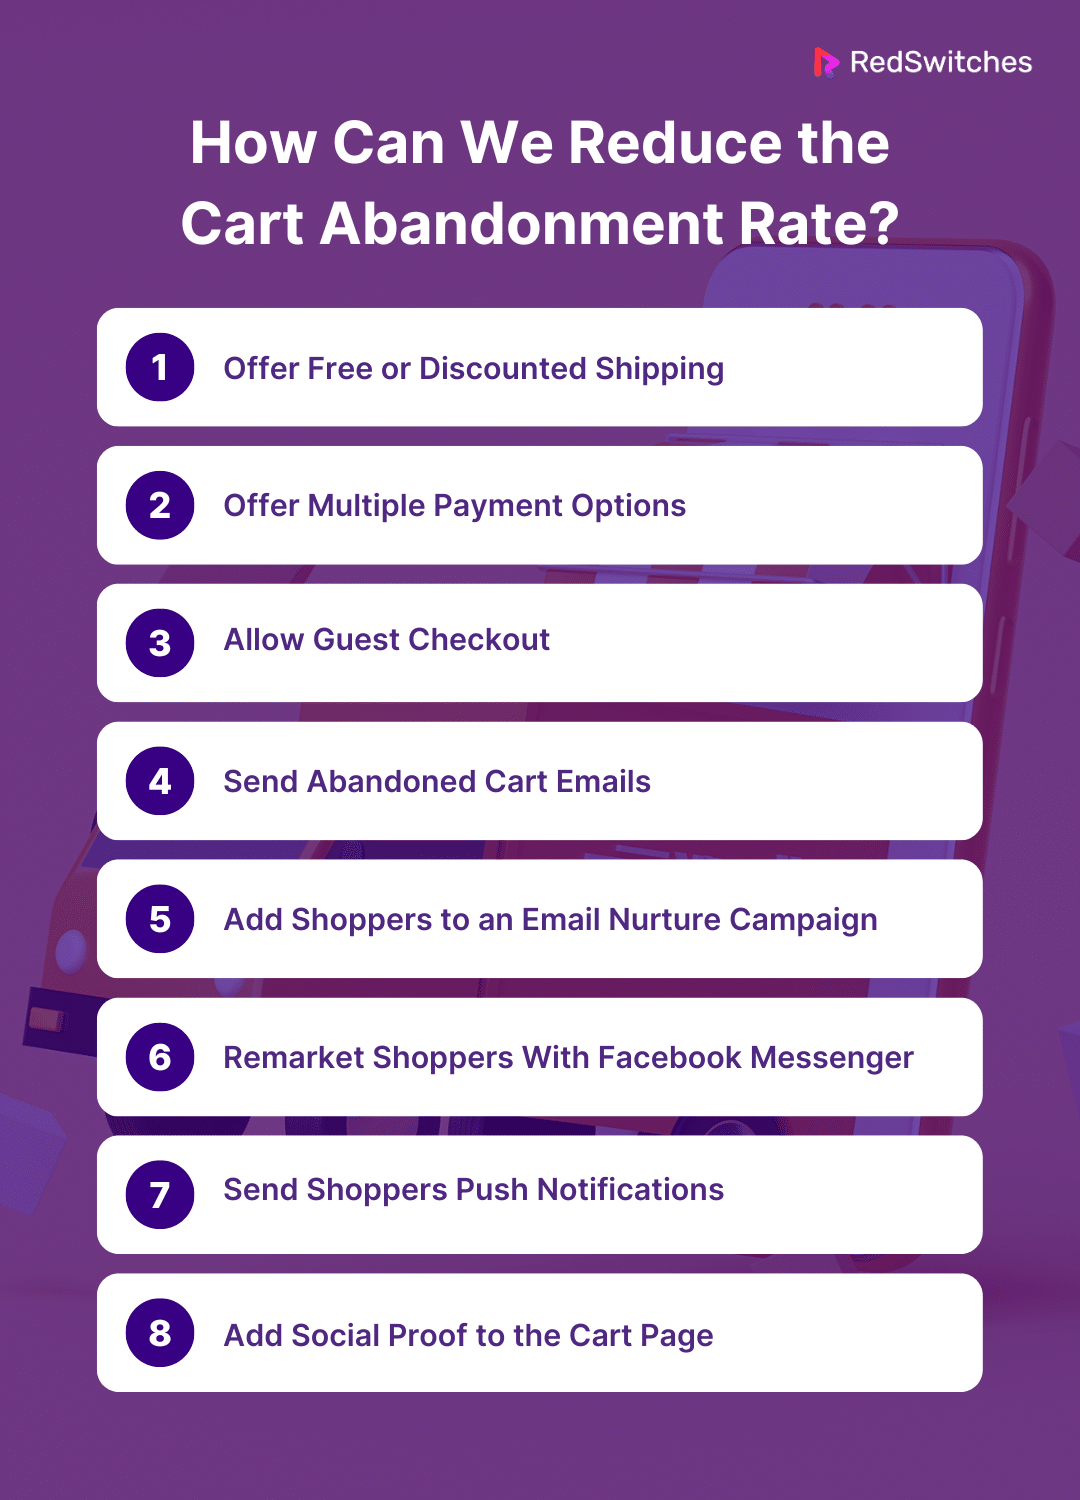 How Can We Reduce the Cart Abandonment Rate